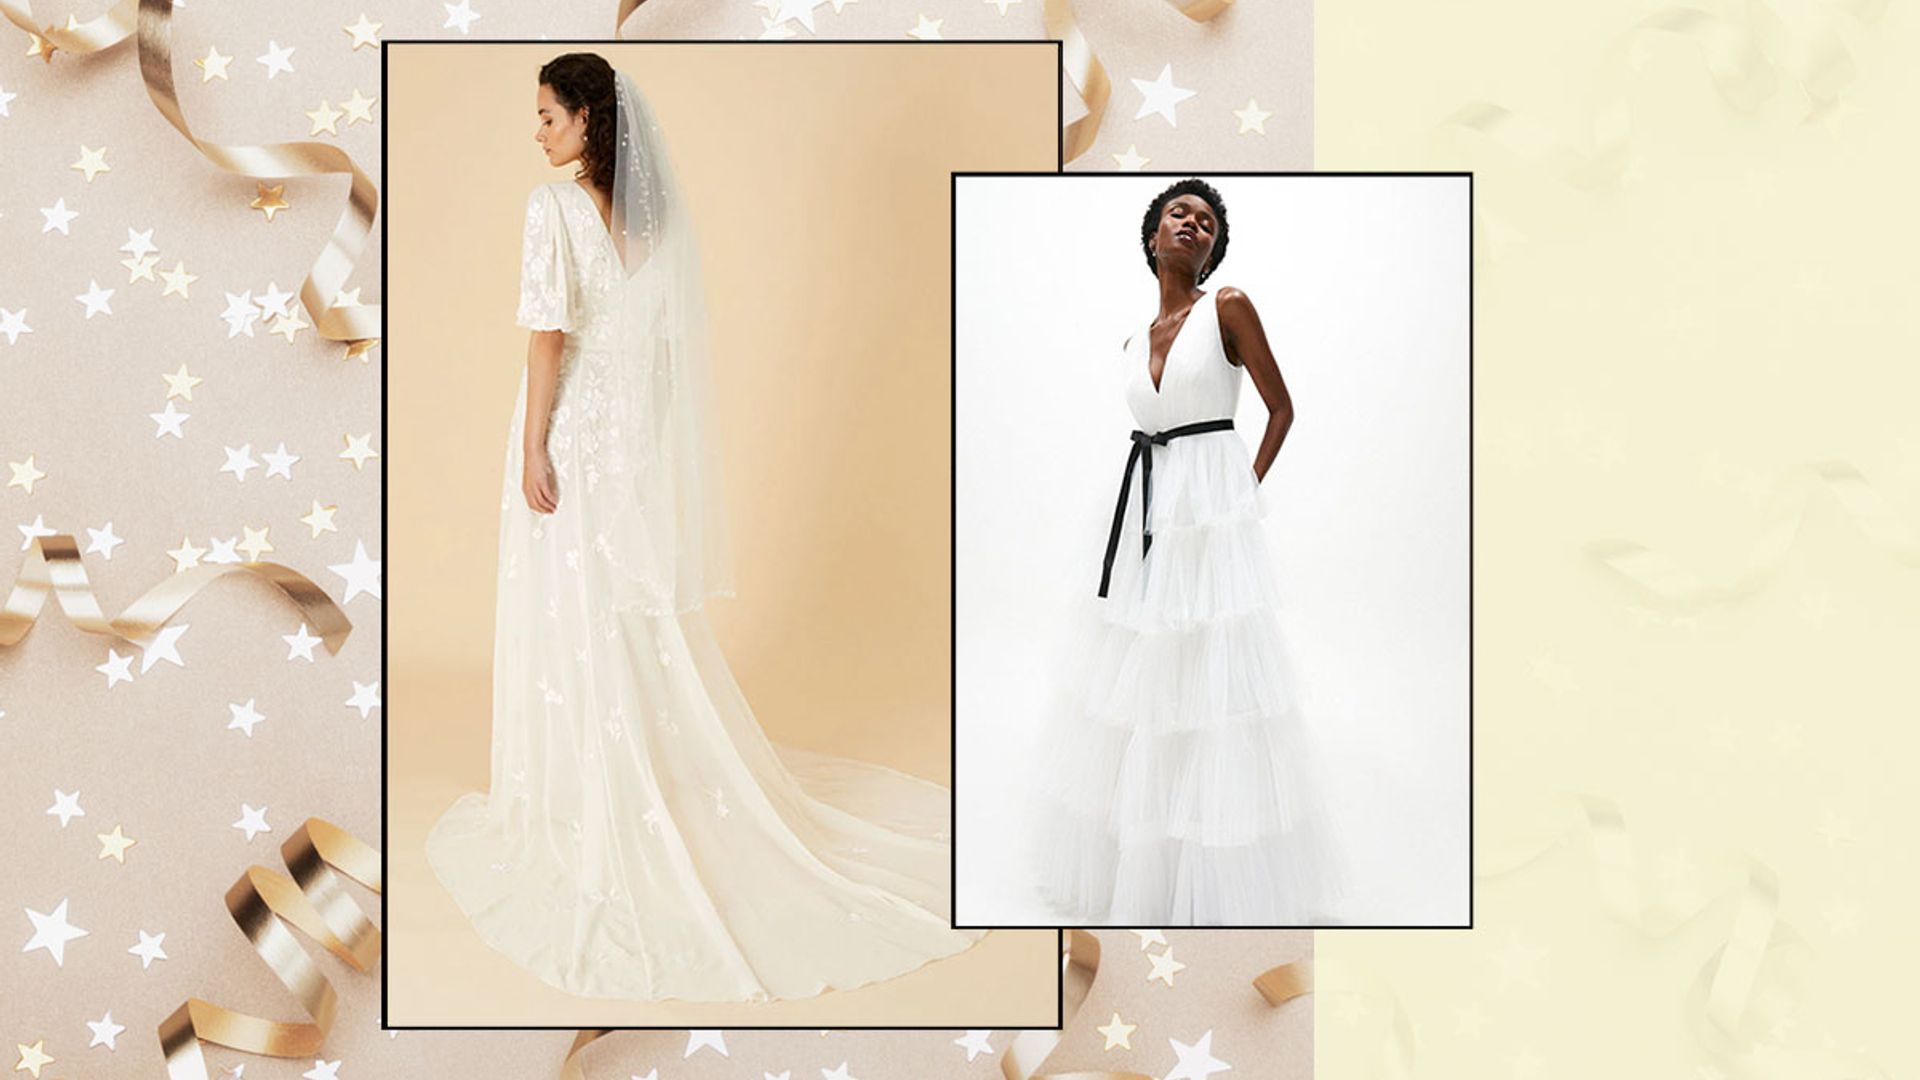 The most stunning wedding dresses included in the Black Friday sale